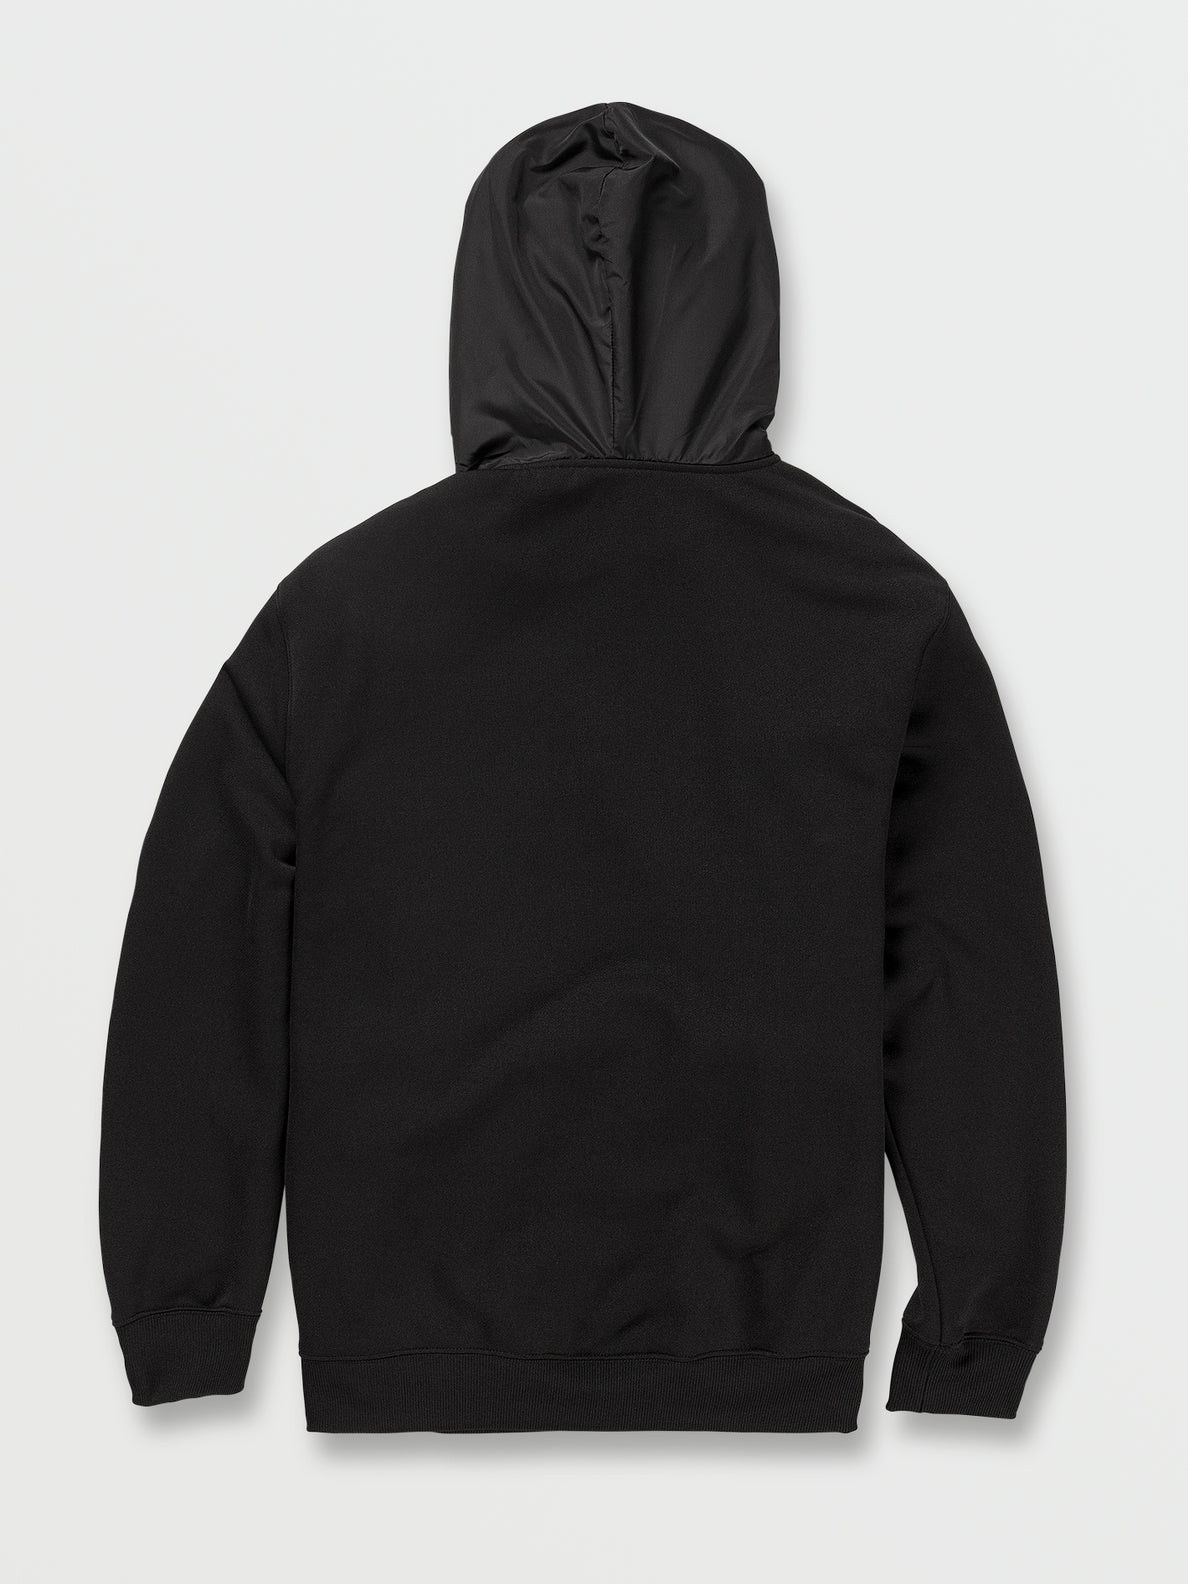 Iconic Tech Pullover Hoodie - Black (A4132200_BLK) [01]